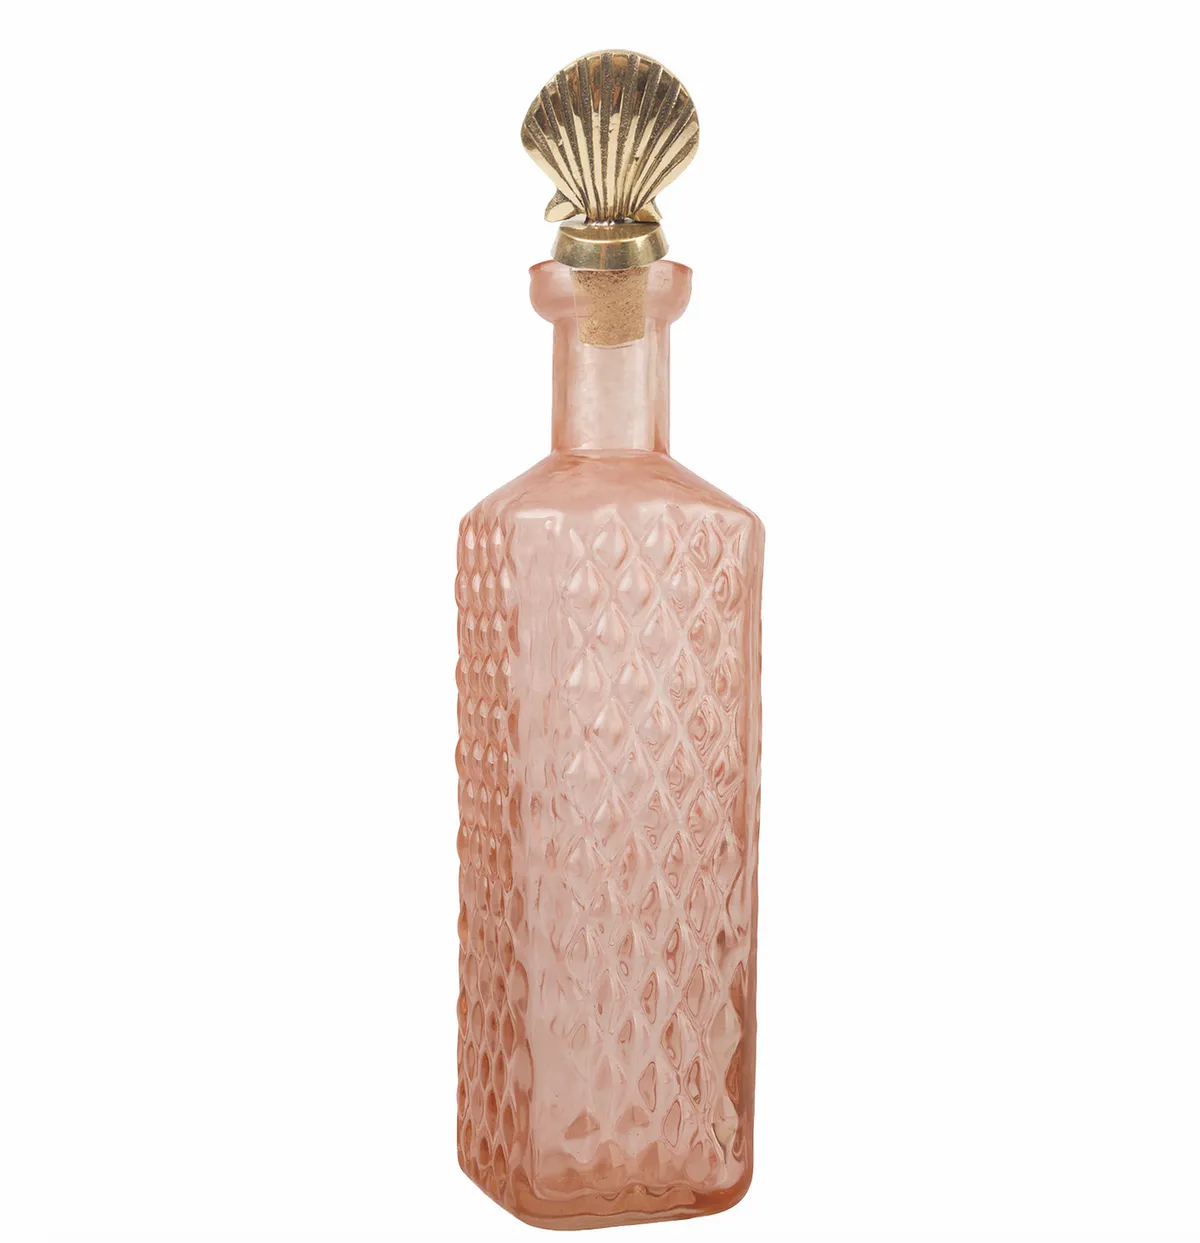 Glam up your dressing table with this pink bottle topped with a golden shell. £35 from Audenza